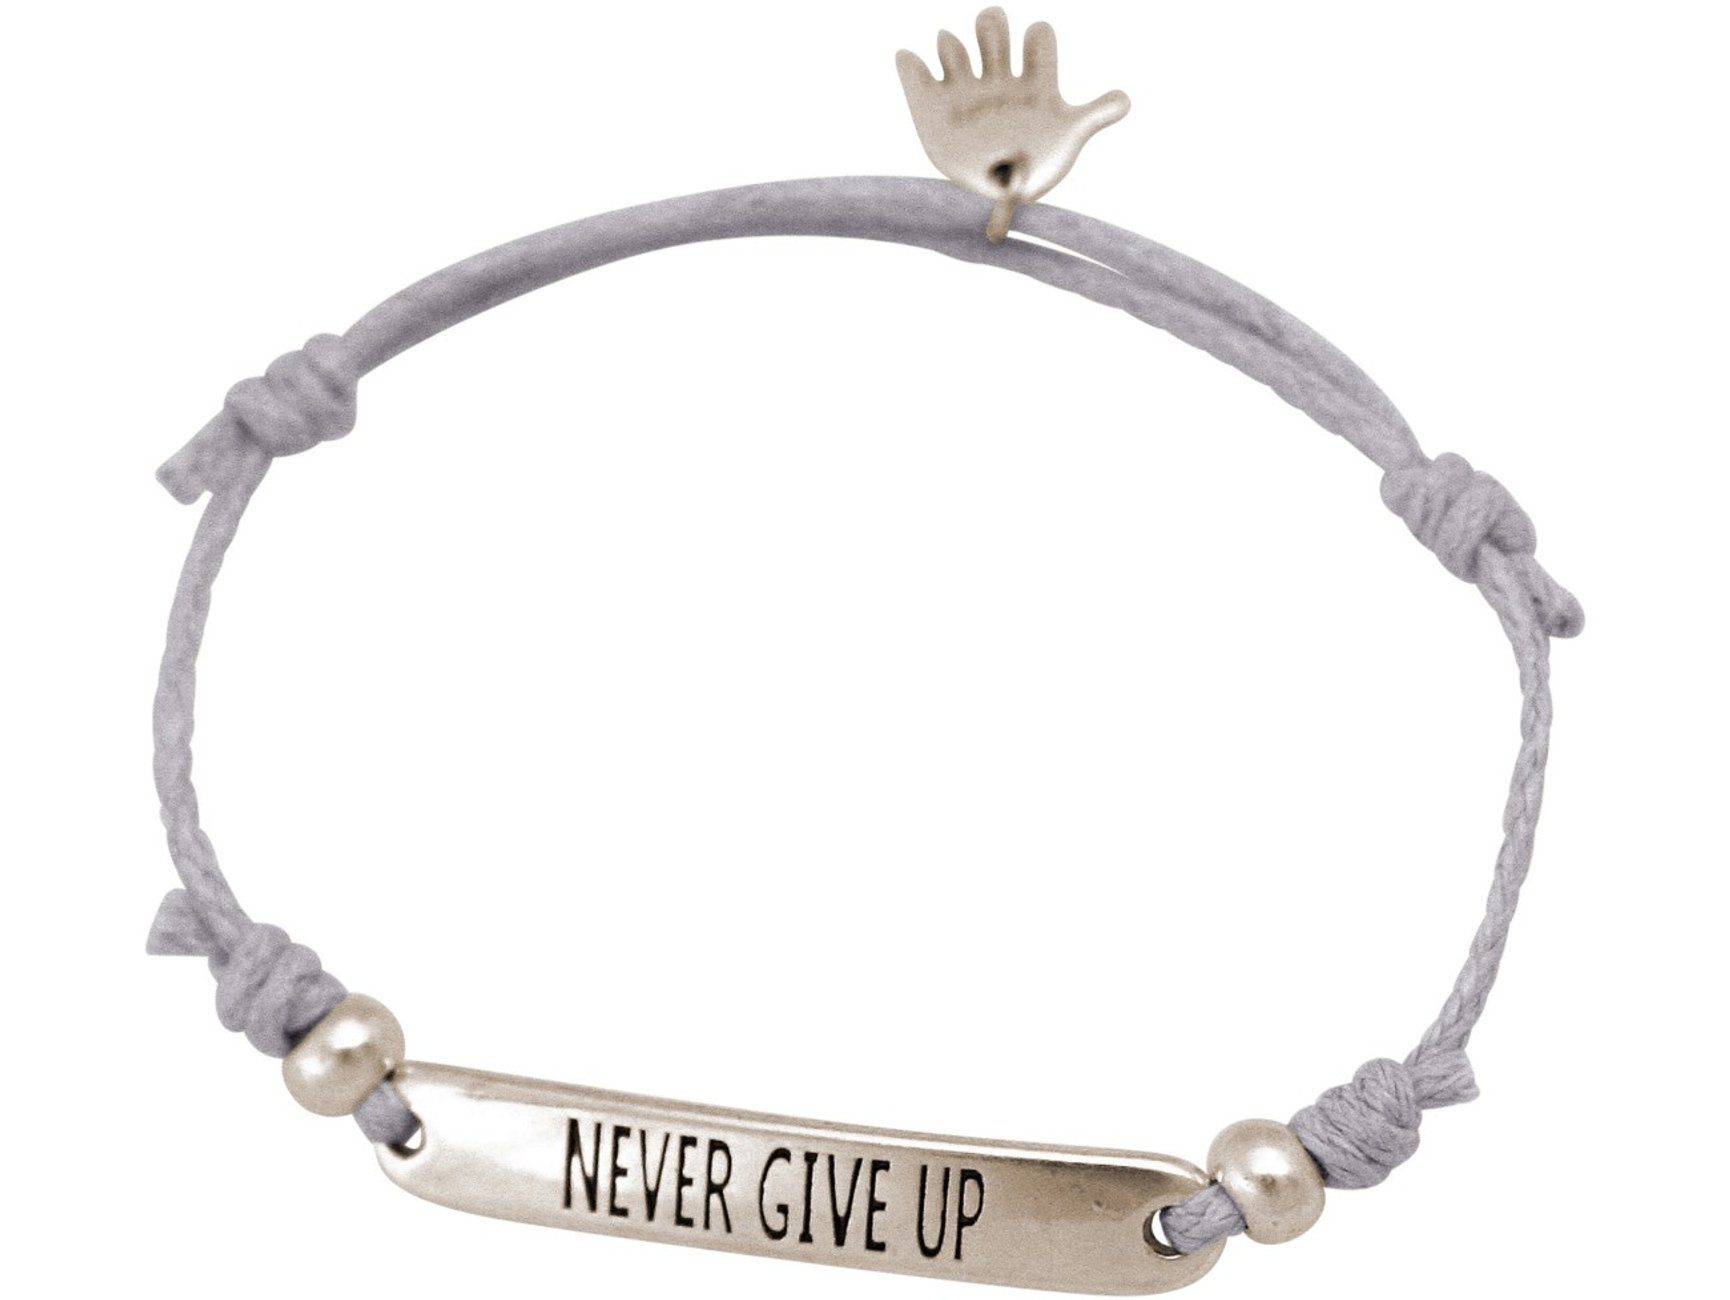 Damen Schmuck Gemshine Charm-Armband NEVER GIVE UP, Made in Germany